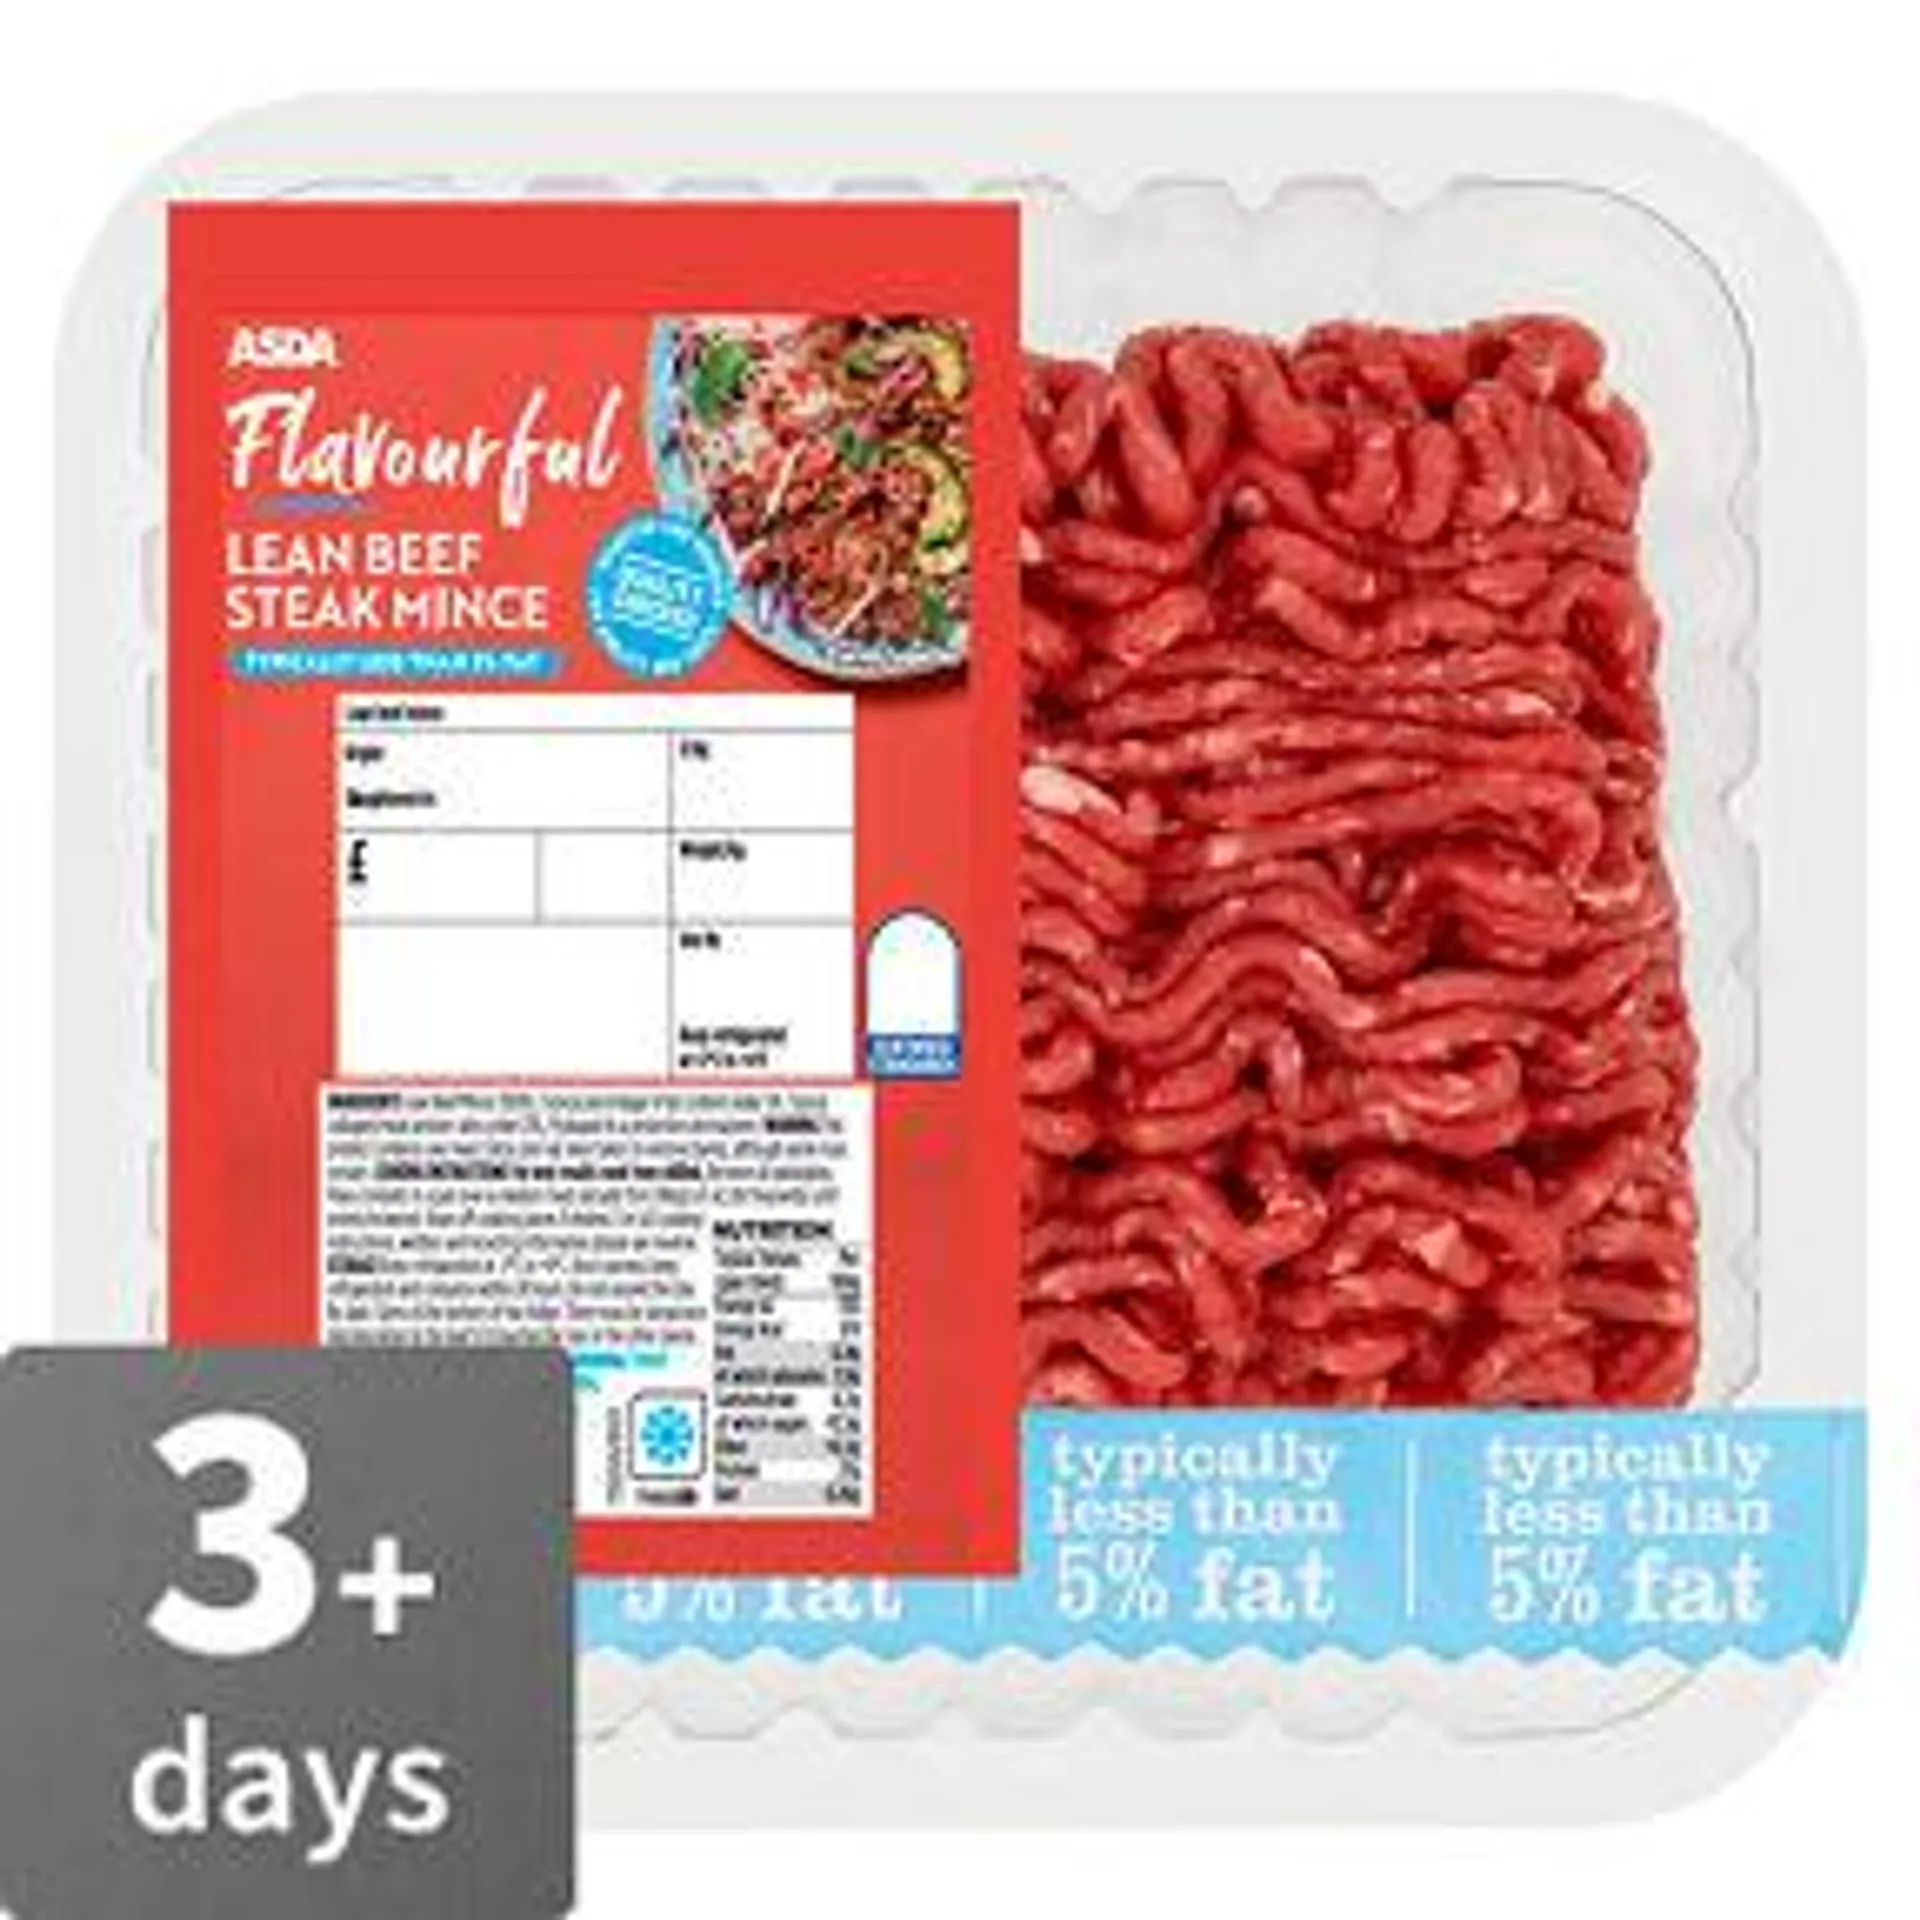 ASDA Flavourful Lean Beef Steak Mince (Typically Less Than 5% Fat)